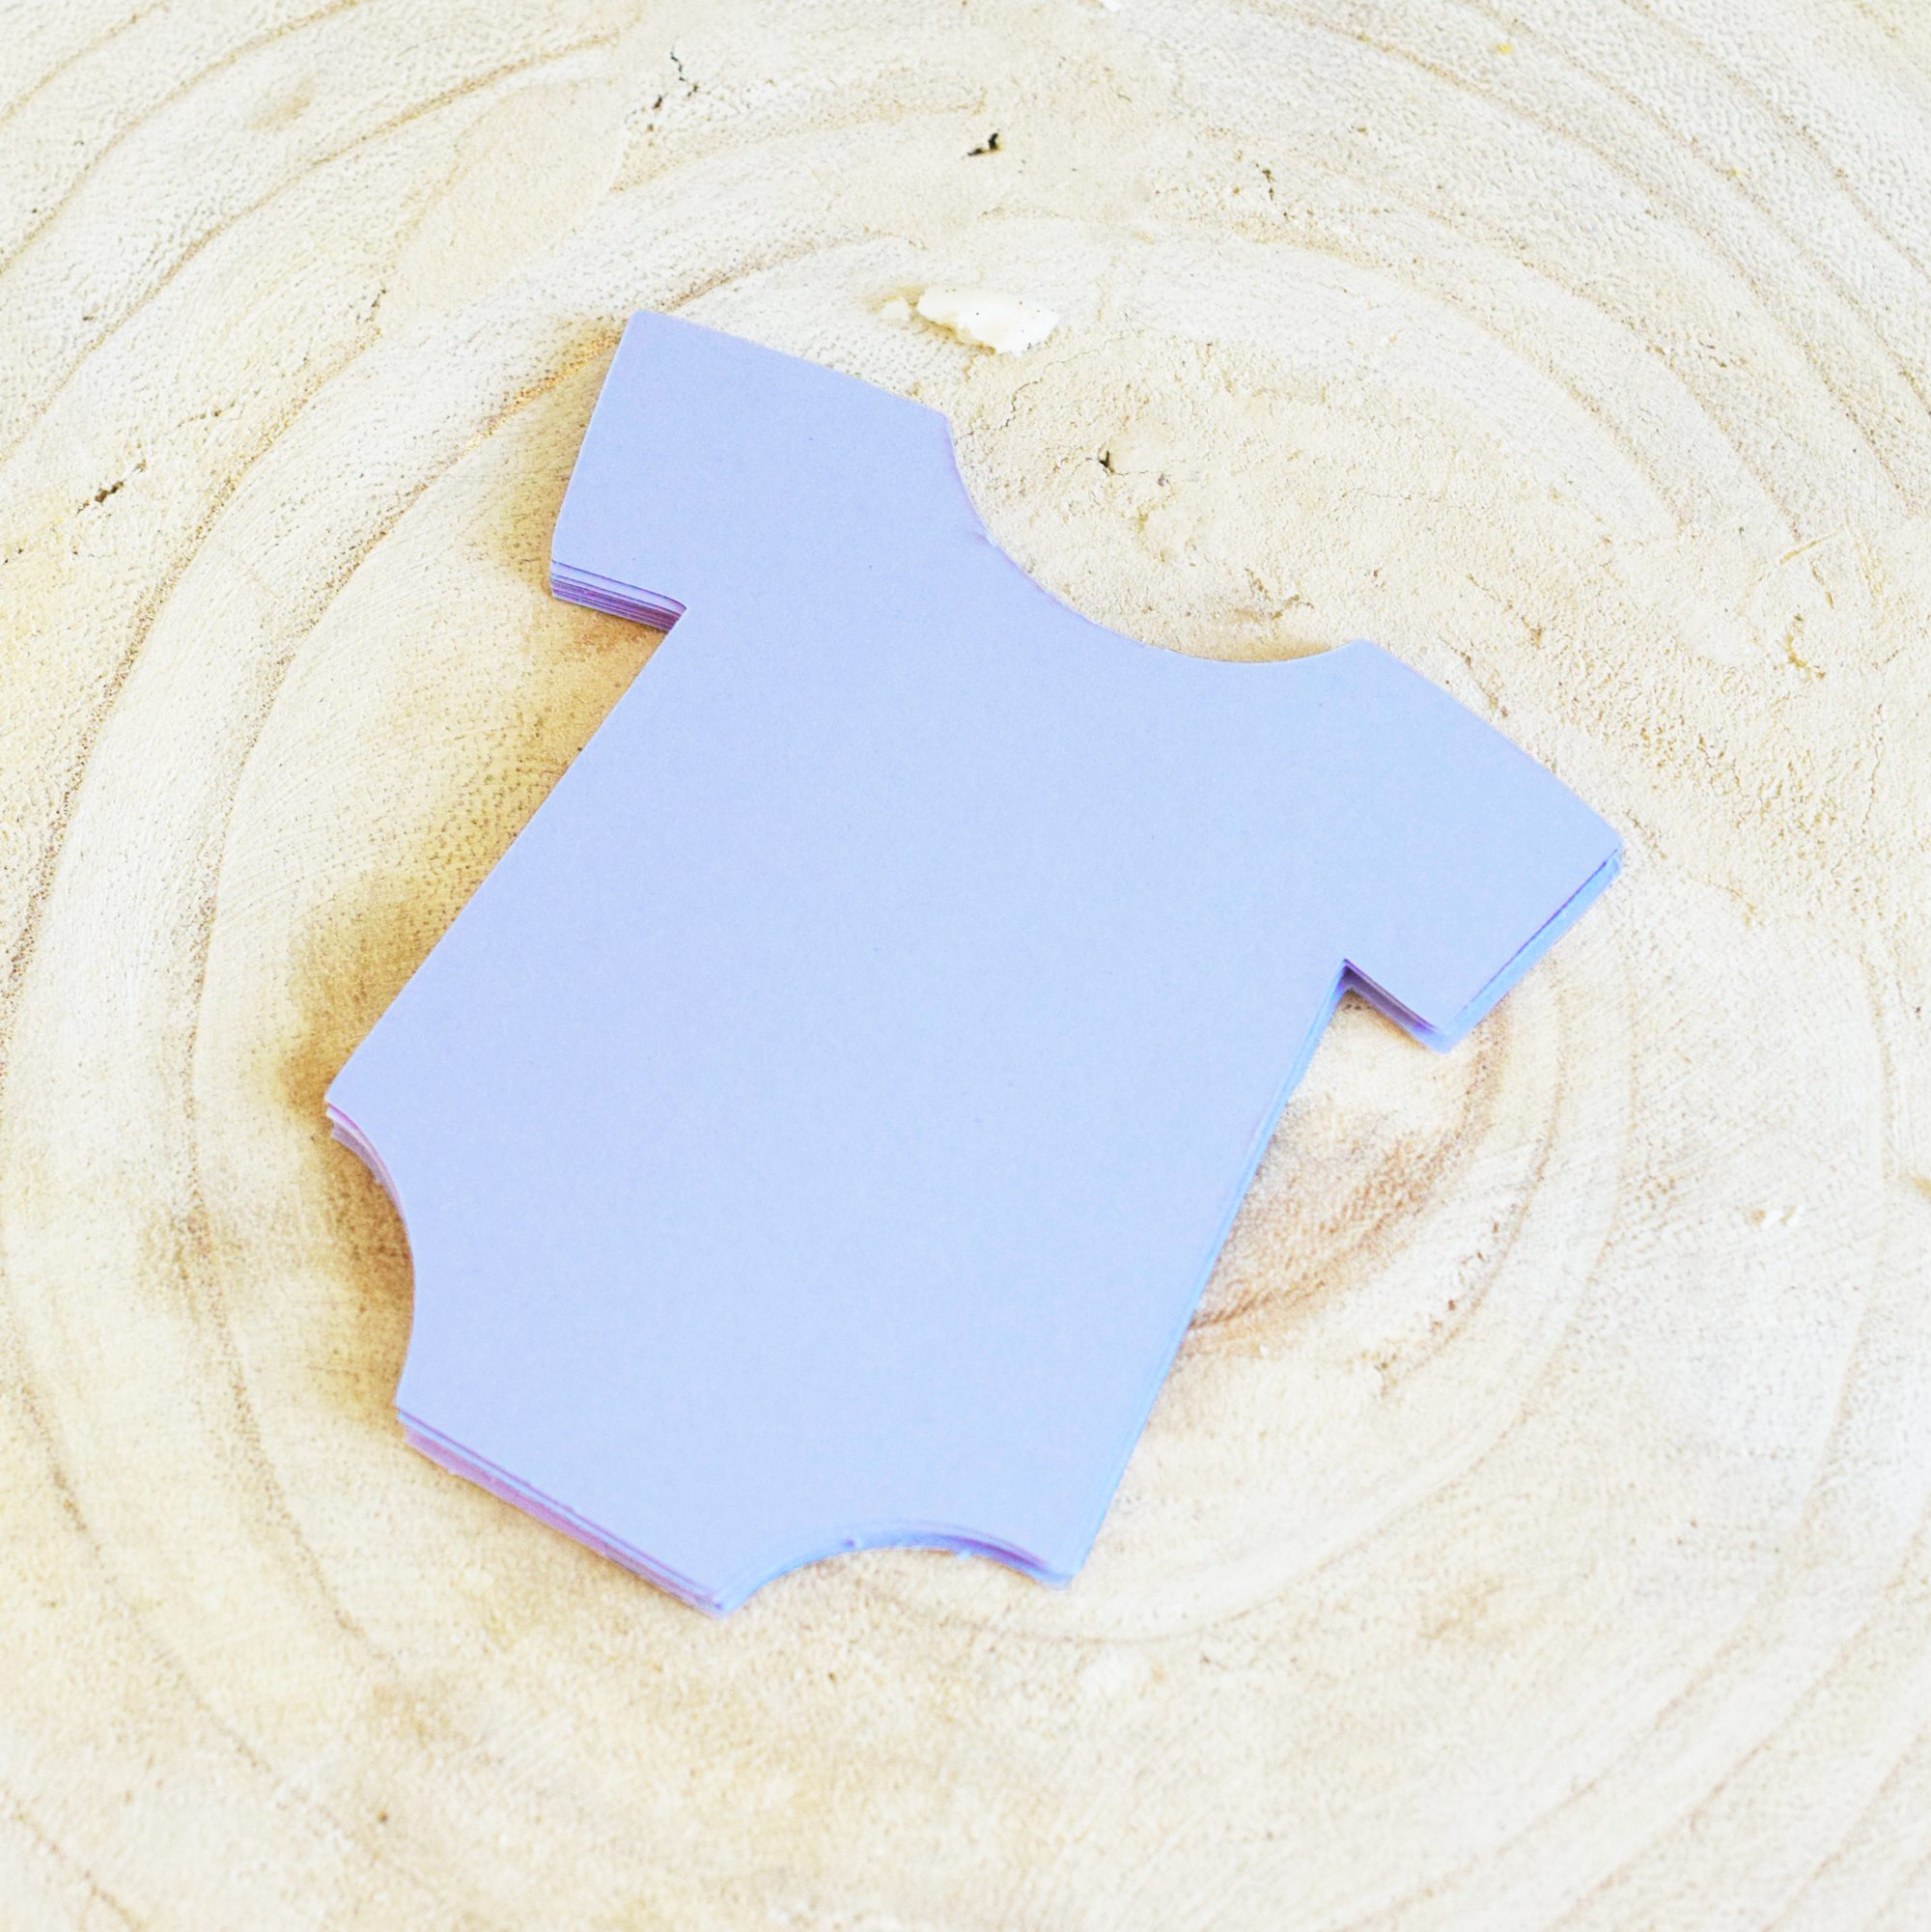 24 baby onesie die cuts in a color of your choice